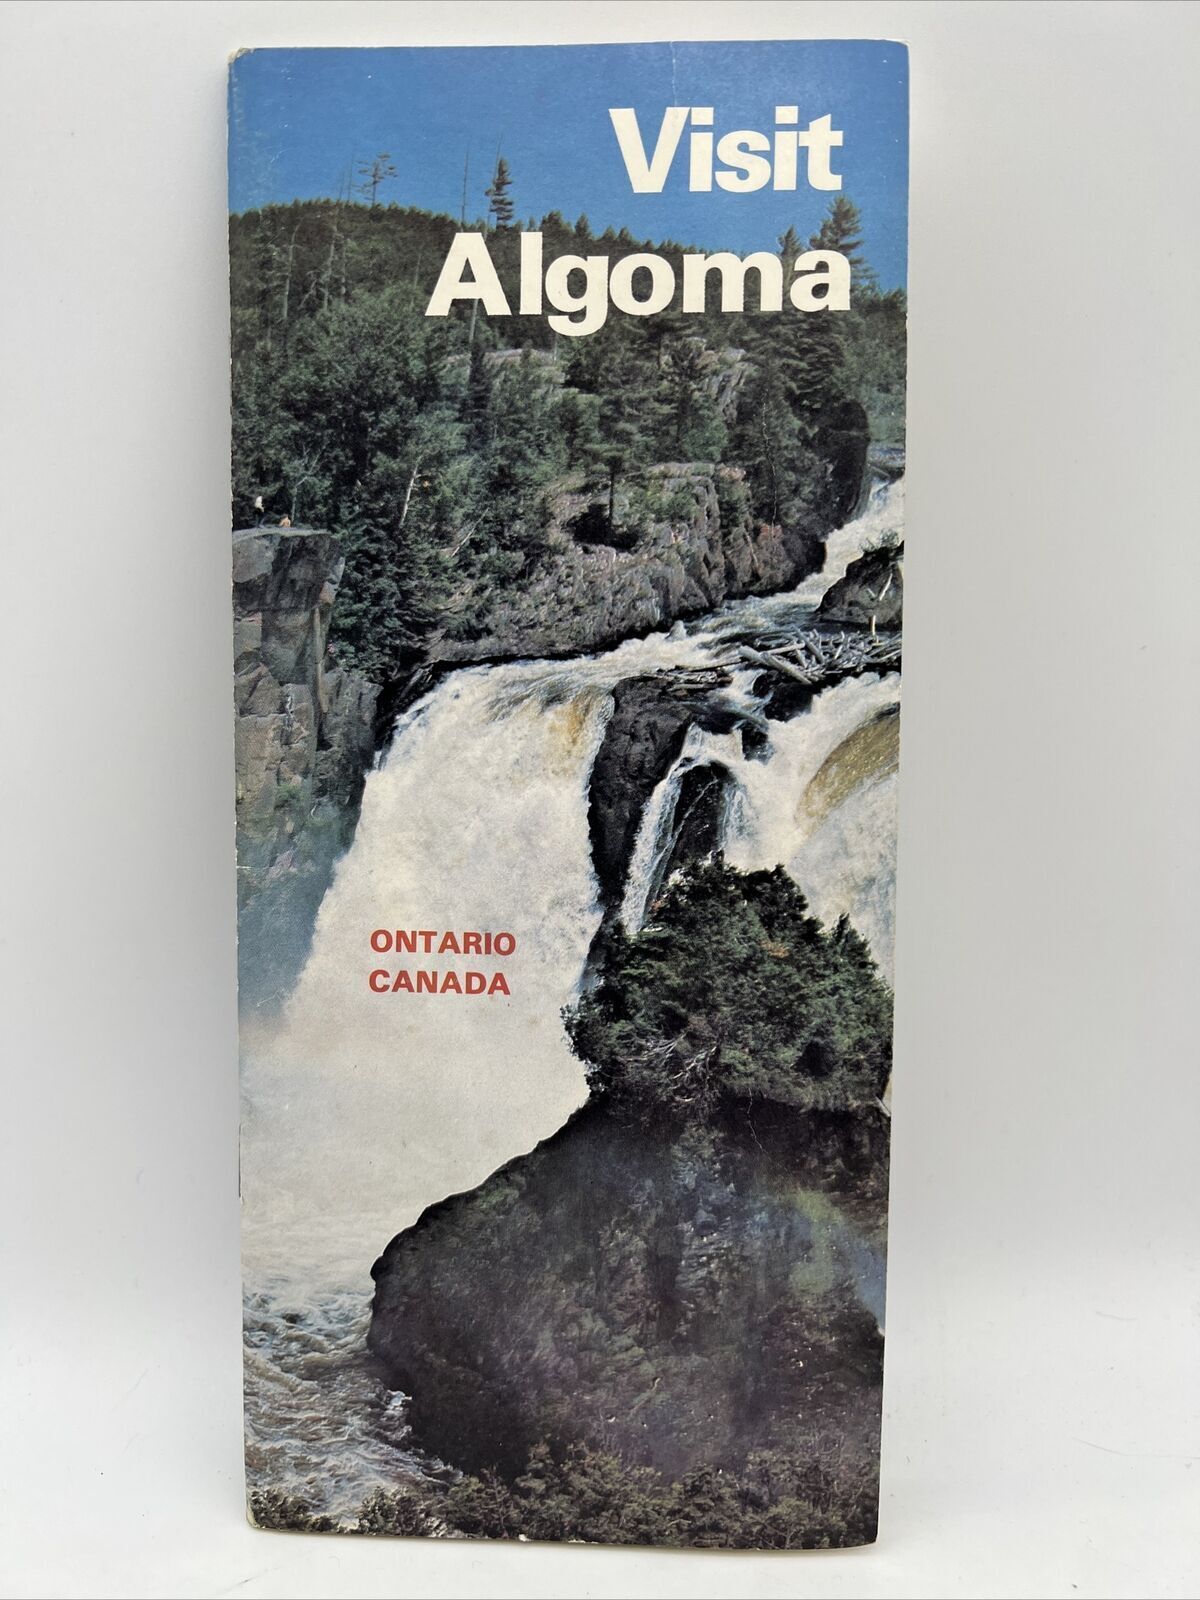 1977 VISIT ALGOMA ONTARIO CANADA Sault St. Marie Travel Tour Guide Booklet & Map